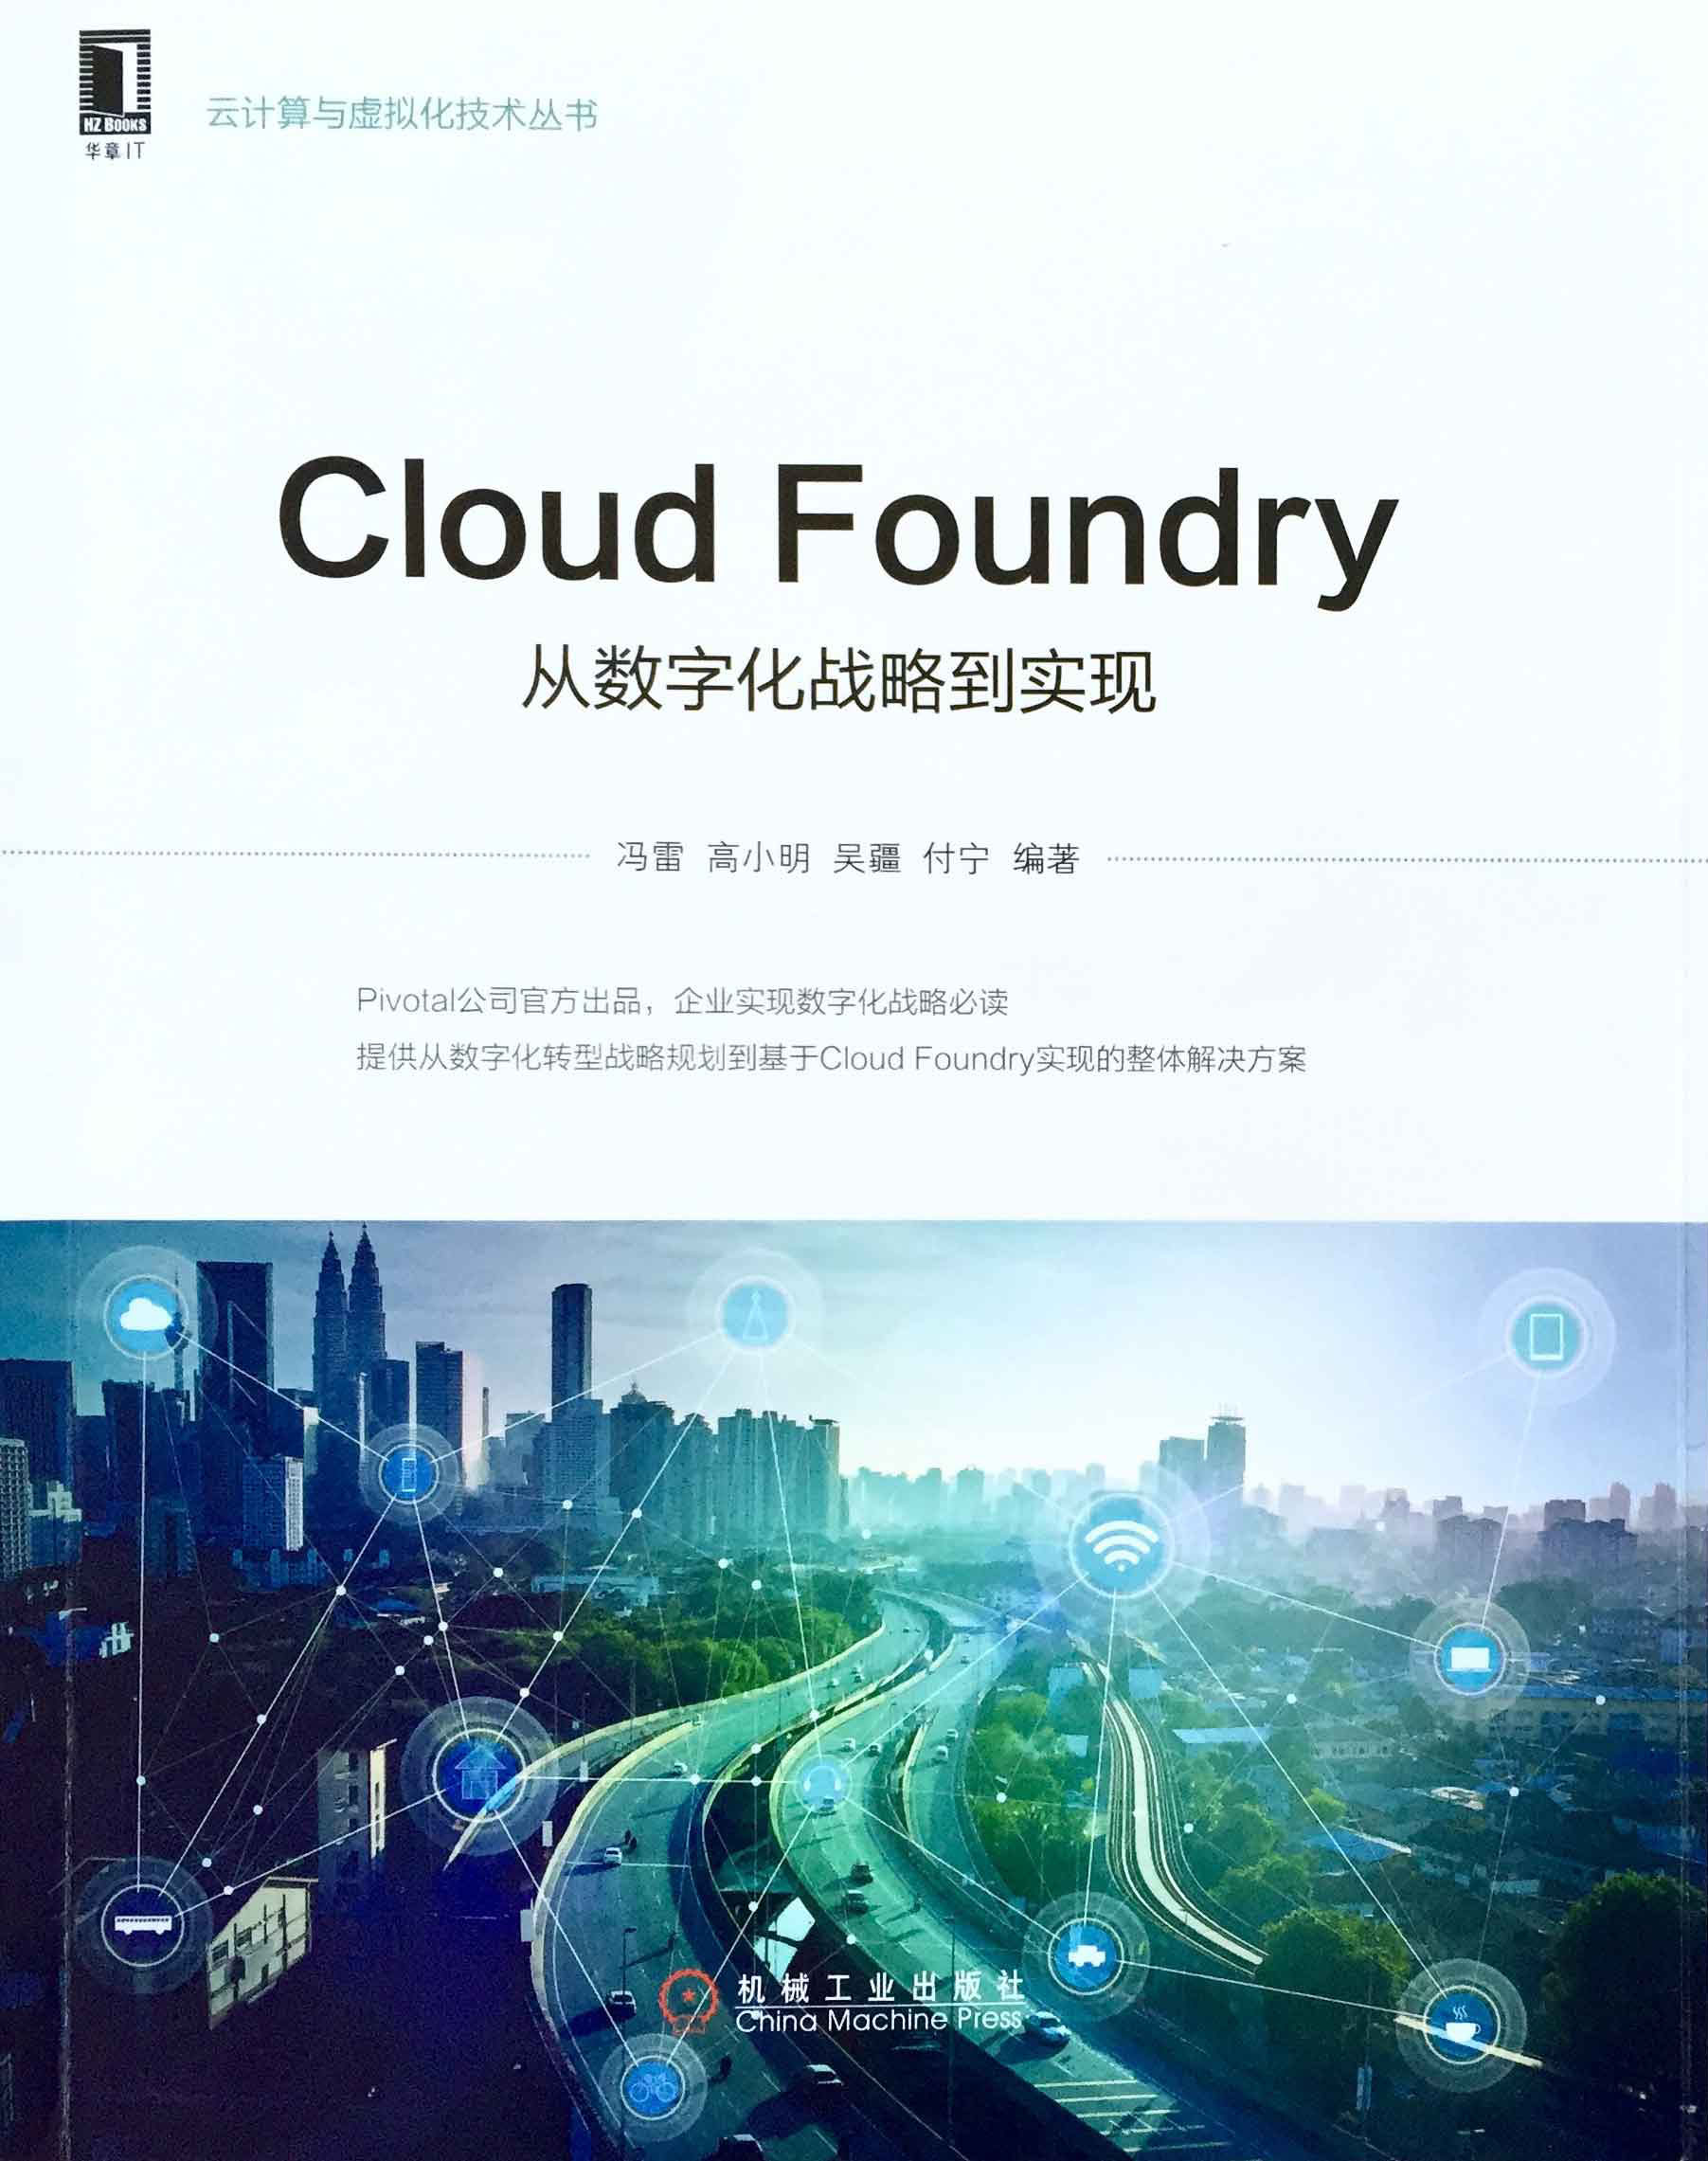 《cloud foundry》